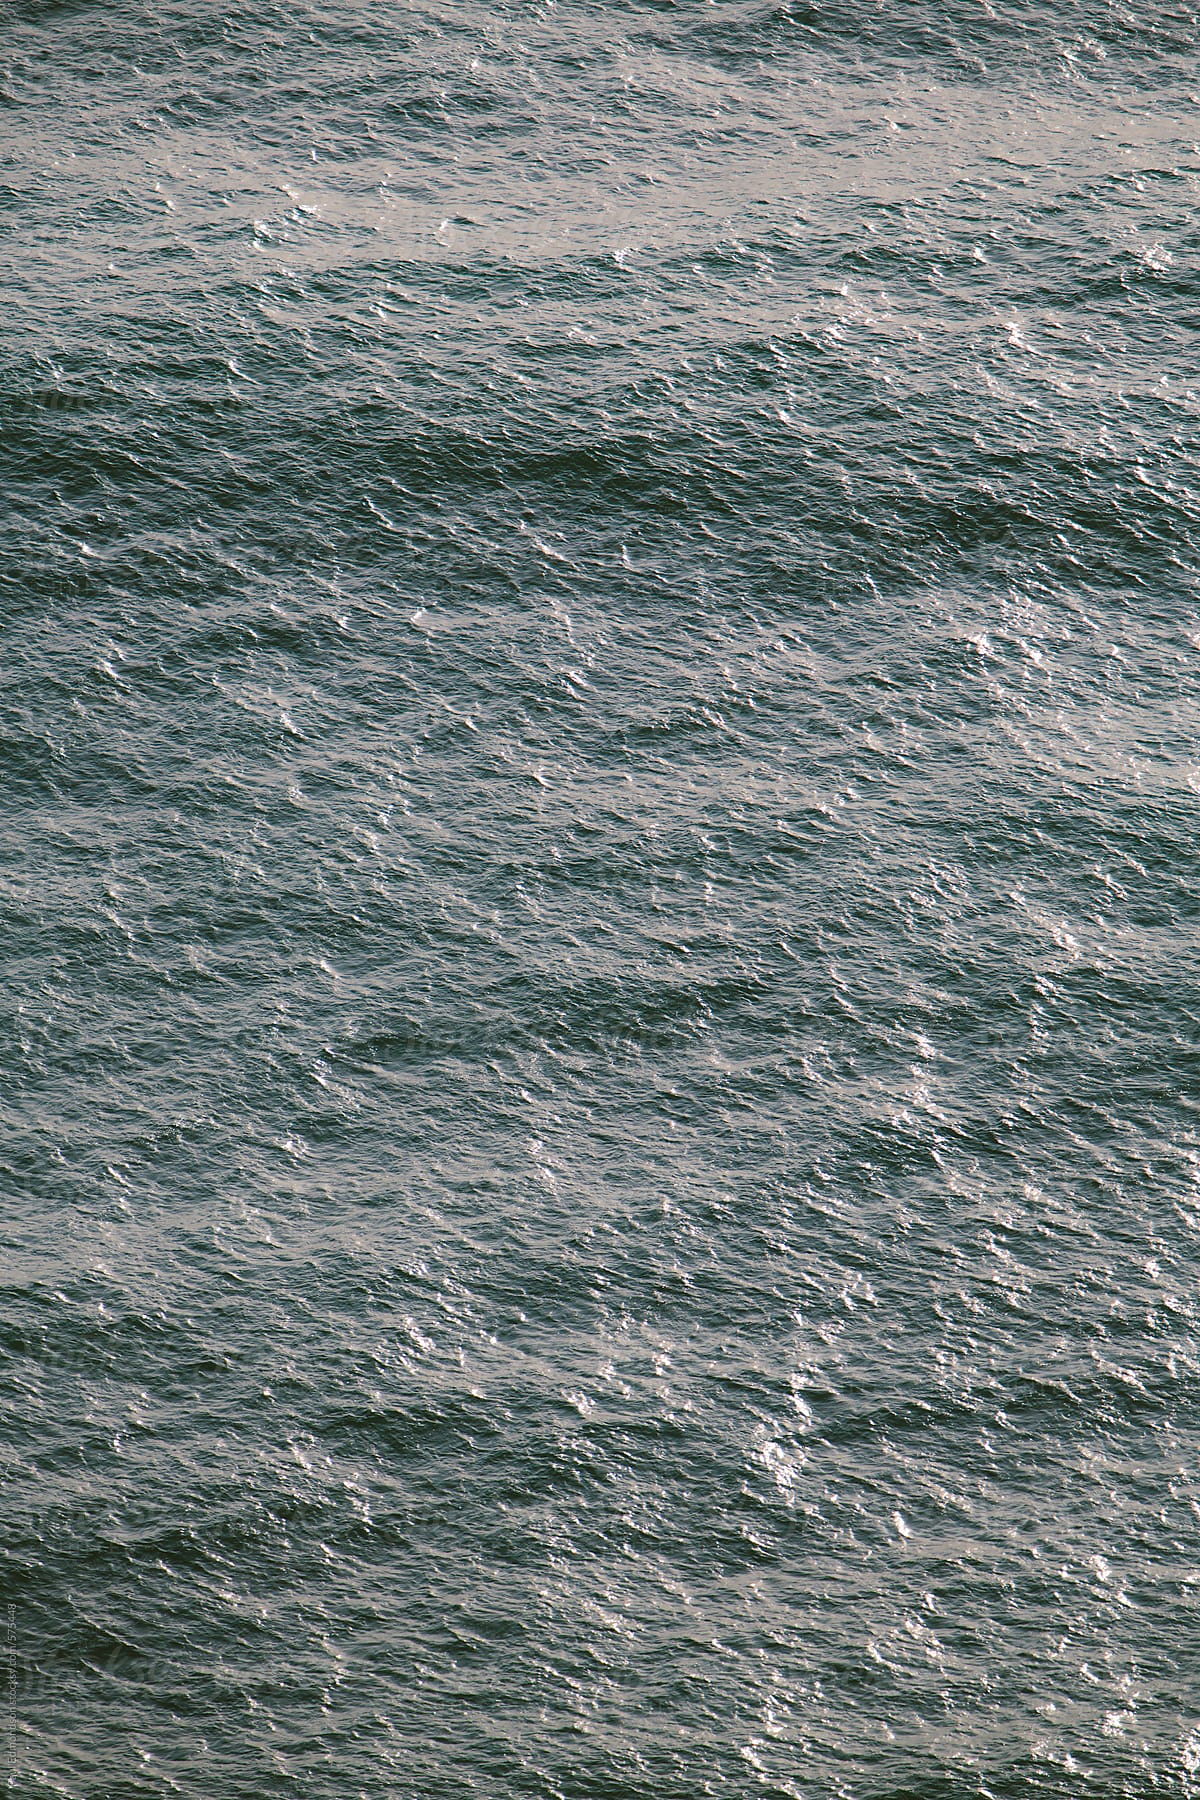 Detail of sunlight reflecting on ocean water and waves